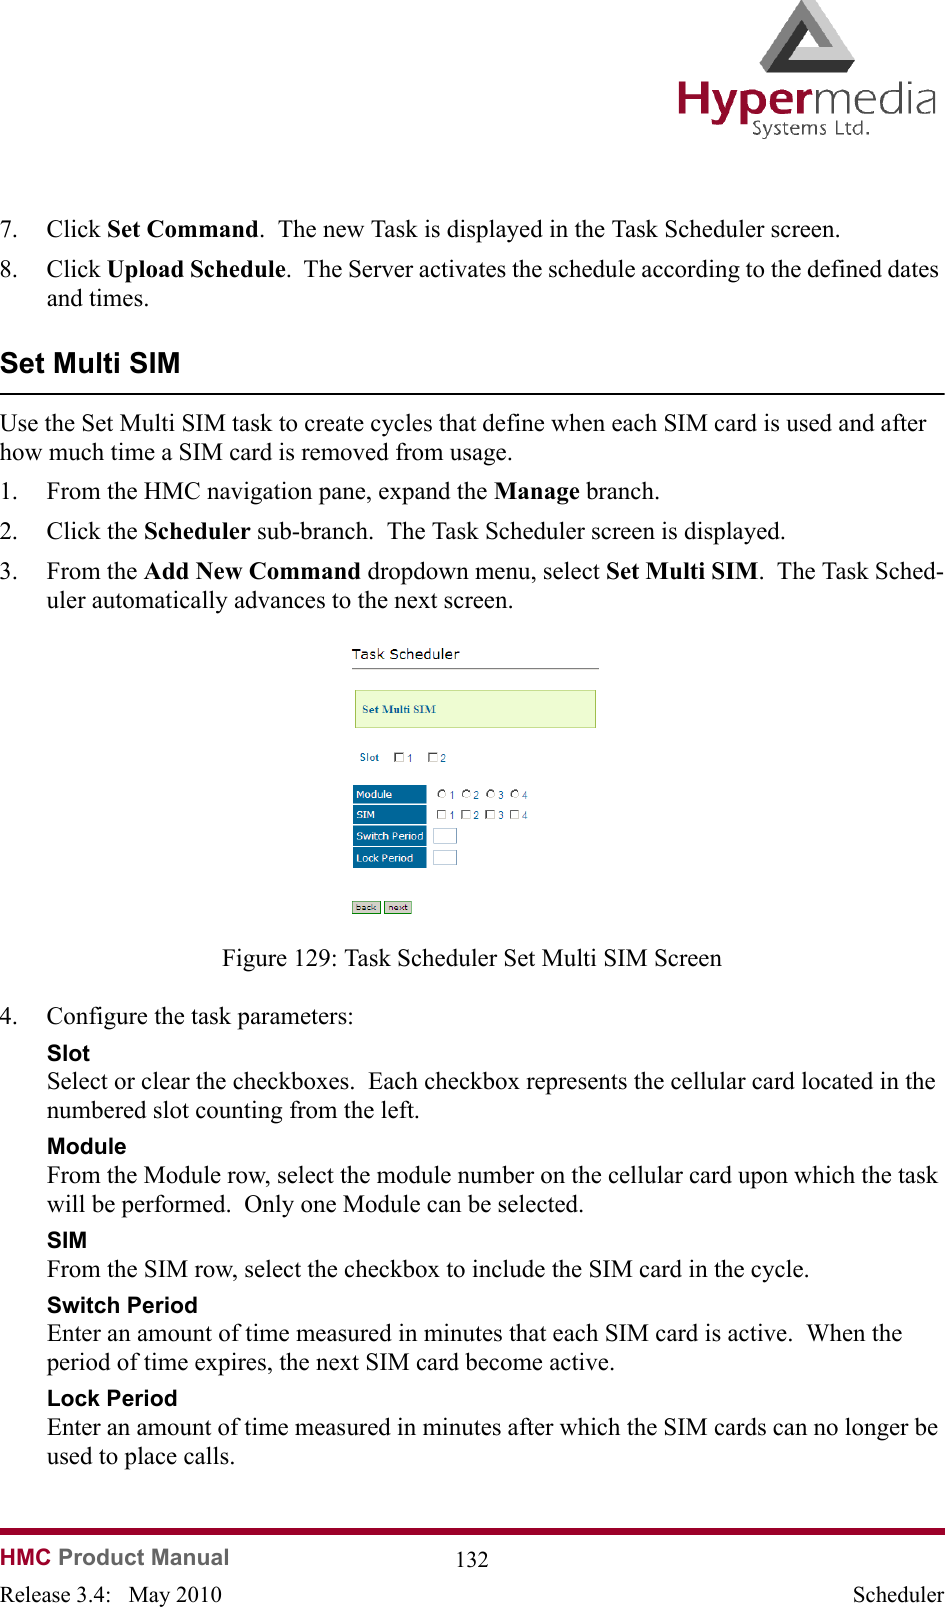   HMC Product Manual  132Release 3.4:   May 2010 Scheduler7. Click Set Command.  The new Task is displayed in the Task Scheduler screen.8. Click Upload Schedule.  The Server activates the schedule according to the defined dates and times.Set Multi SIMUse the Set Multi SIM task to create cycles that define when each SIM card is used and after how much time a SIM card is removed from usage.1. From the HMC navigation pane, expand the Manage branch.2. Click the Scheduler sub-branch.  The Task Scheduler screen is displayed.3. From the Add New Command dropdown menu, select Set Multi SIM.  The Task Sched-uler automatically advances to the next screen.              Figure 129: Task Scheduler Set Multi SIM Screen4. Configure the task parameters:SlotSelect or clear the checkboxes.  Each checkbox represents the cellular card located in the numbered slot counting from the left.ModuleFrom the Module row, select the module number on the cellular card upon which the task will be performed.  Only one Module can be selected.SIMFrom the SIM row, select the checkbox to include the SIM card in the cycle.Switch PeriodEnter an amount of time measured in minutes that each SIM card is active.  When the period of time expires, the next SIM card become active.  Lock PeriodEnter an amount of time measured in minutes after which the SIM cards can no longer be used to place calls.